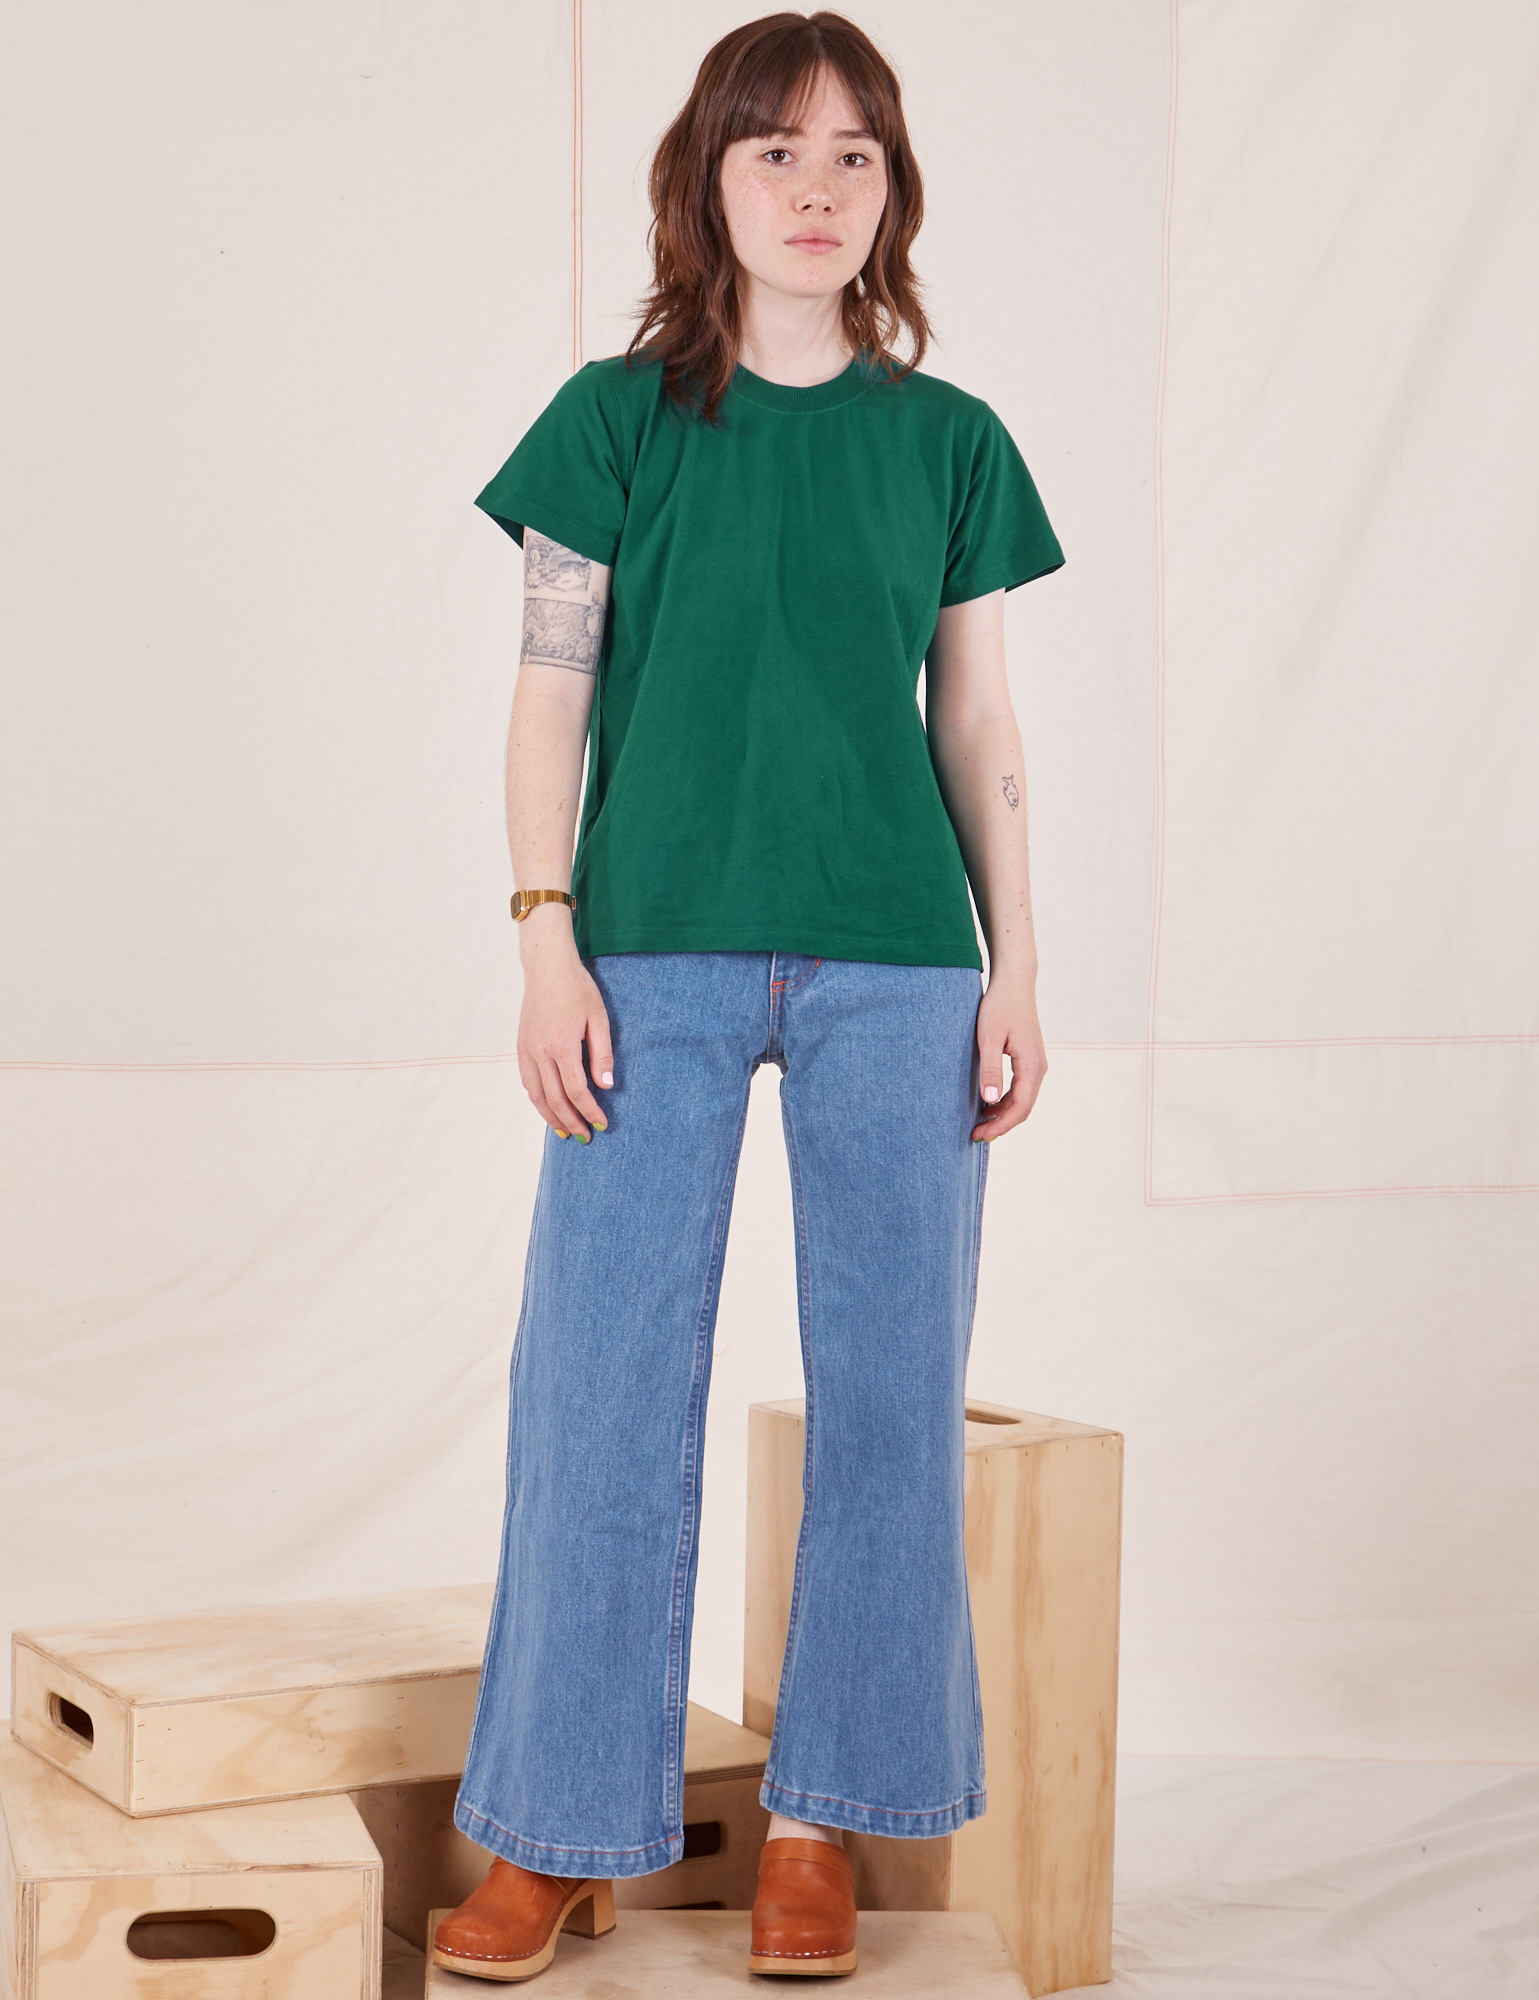 Hana is wearing size P Organic Vintage Tee in Hunter Green paired with light wash Sailor Jeans